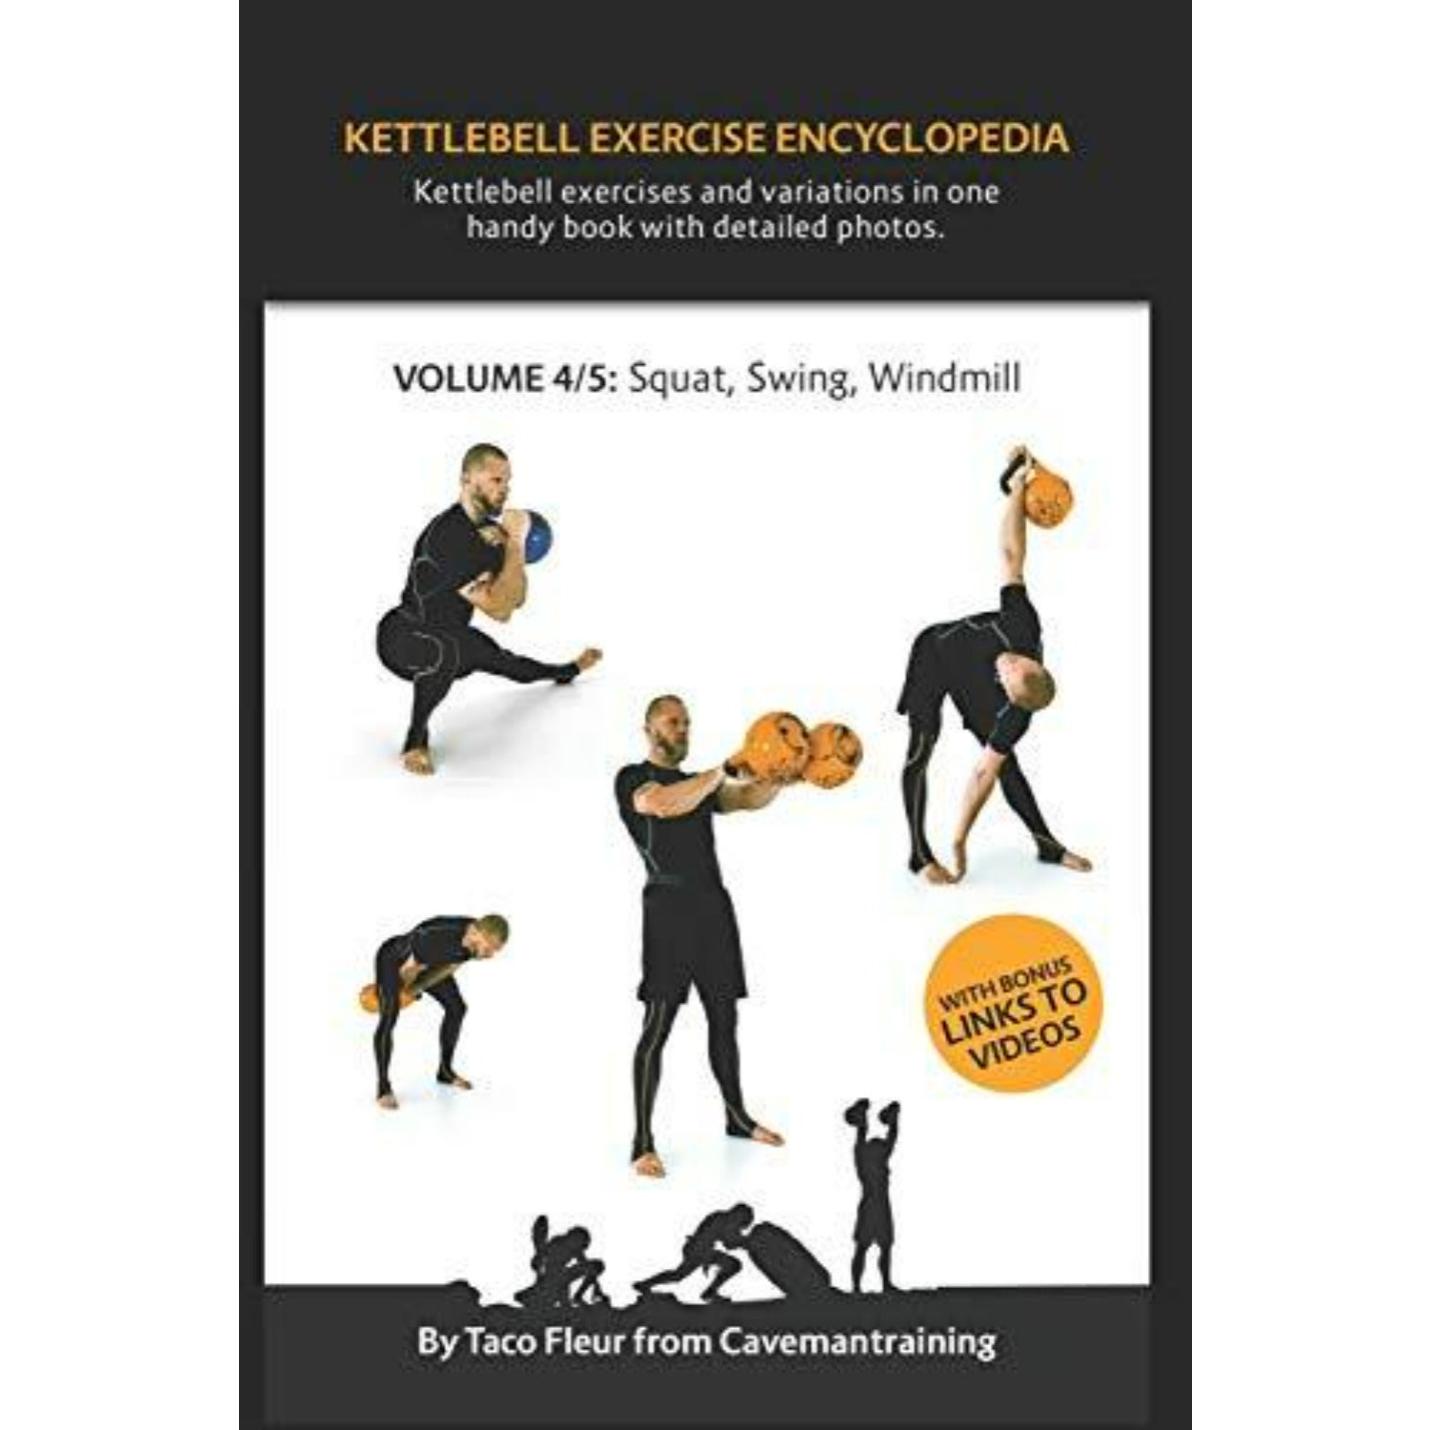 Kettlebell Exercise Encyclopedia VOL. 4: Kettlebell squat, swing, and windmill exercise variations - kettlebell oefeningen - happygetfit.com